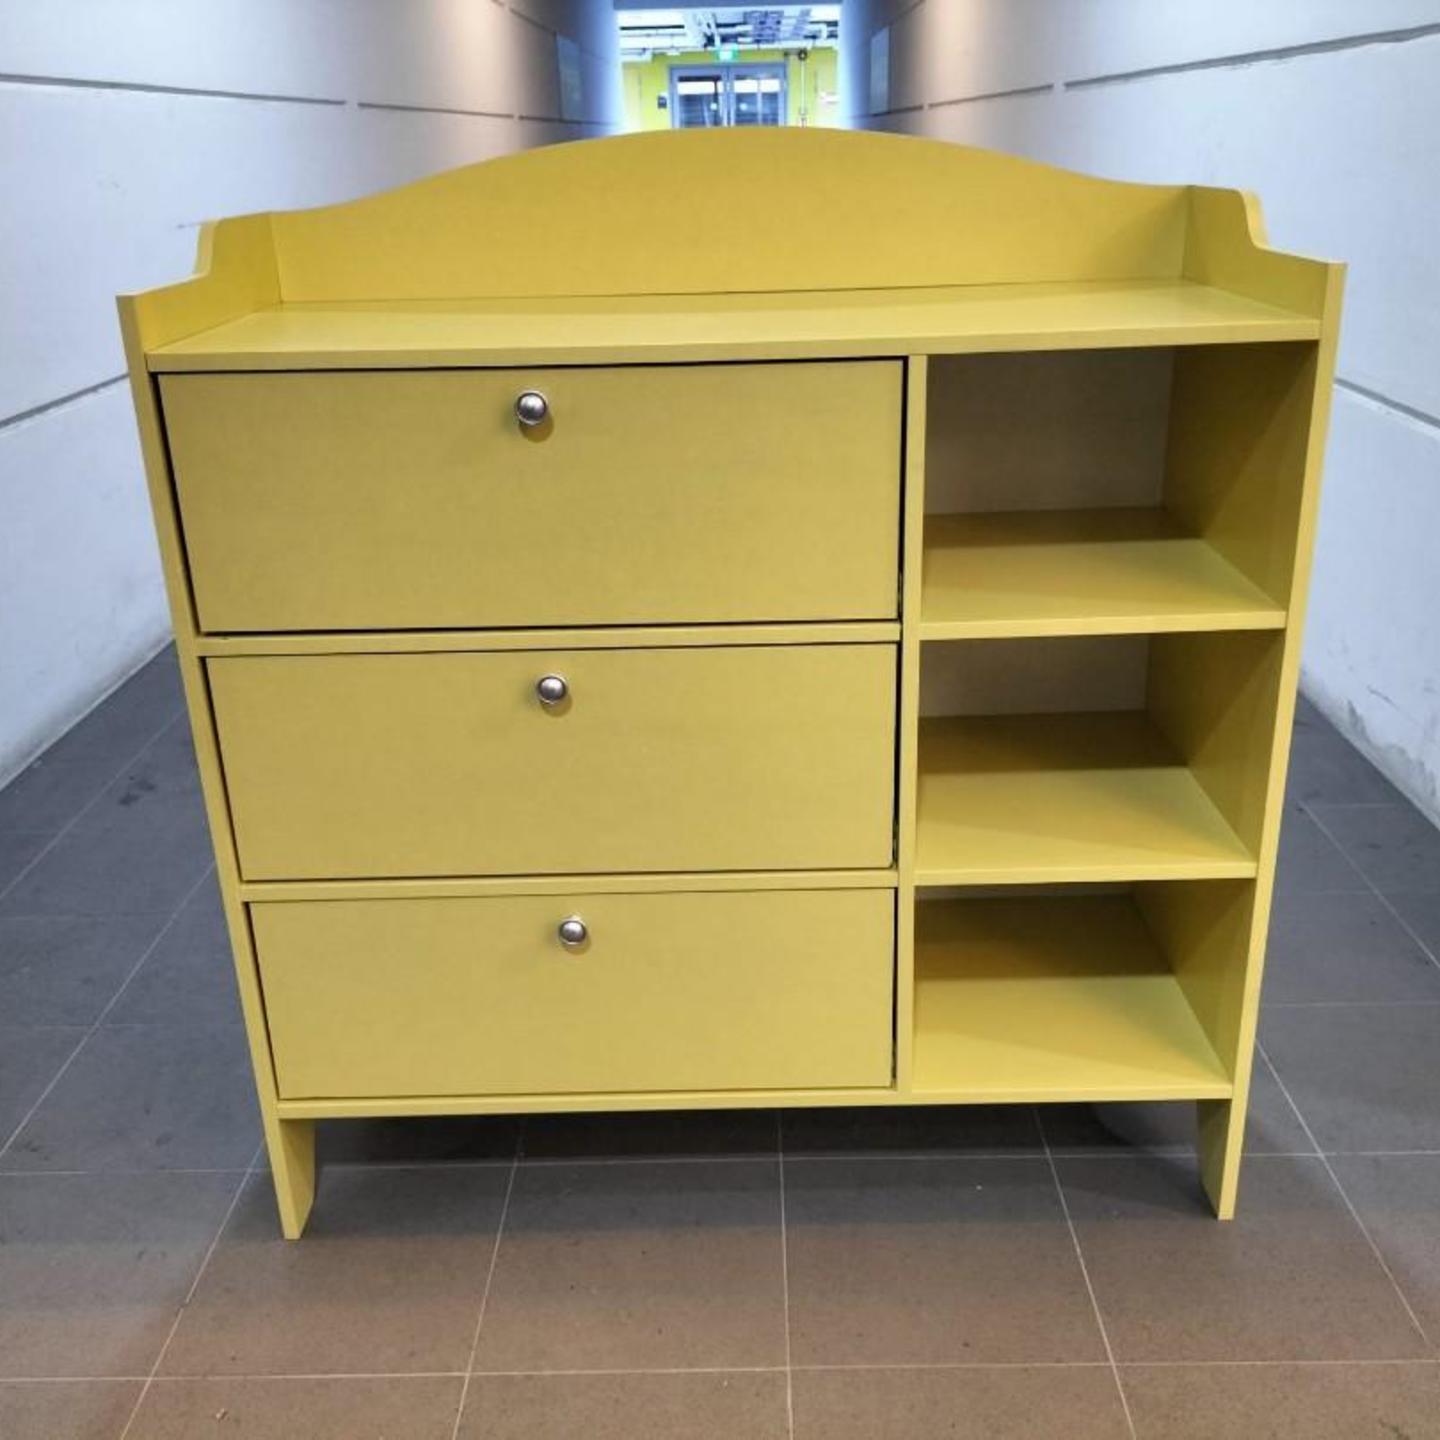 HANJIN Chest of Drawers In Mustard Yellow